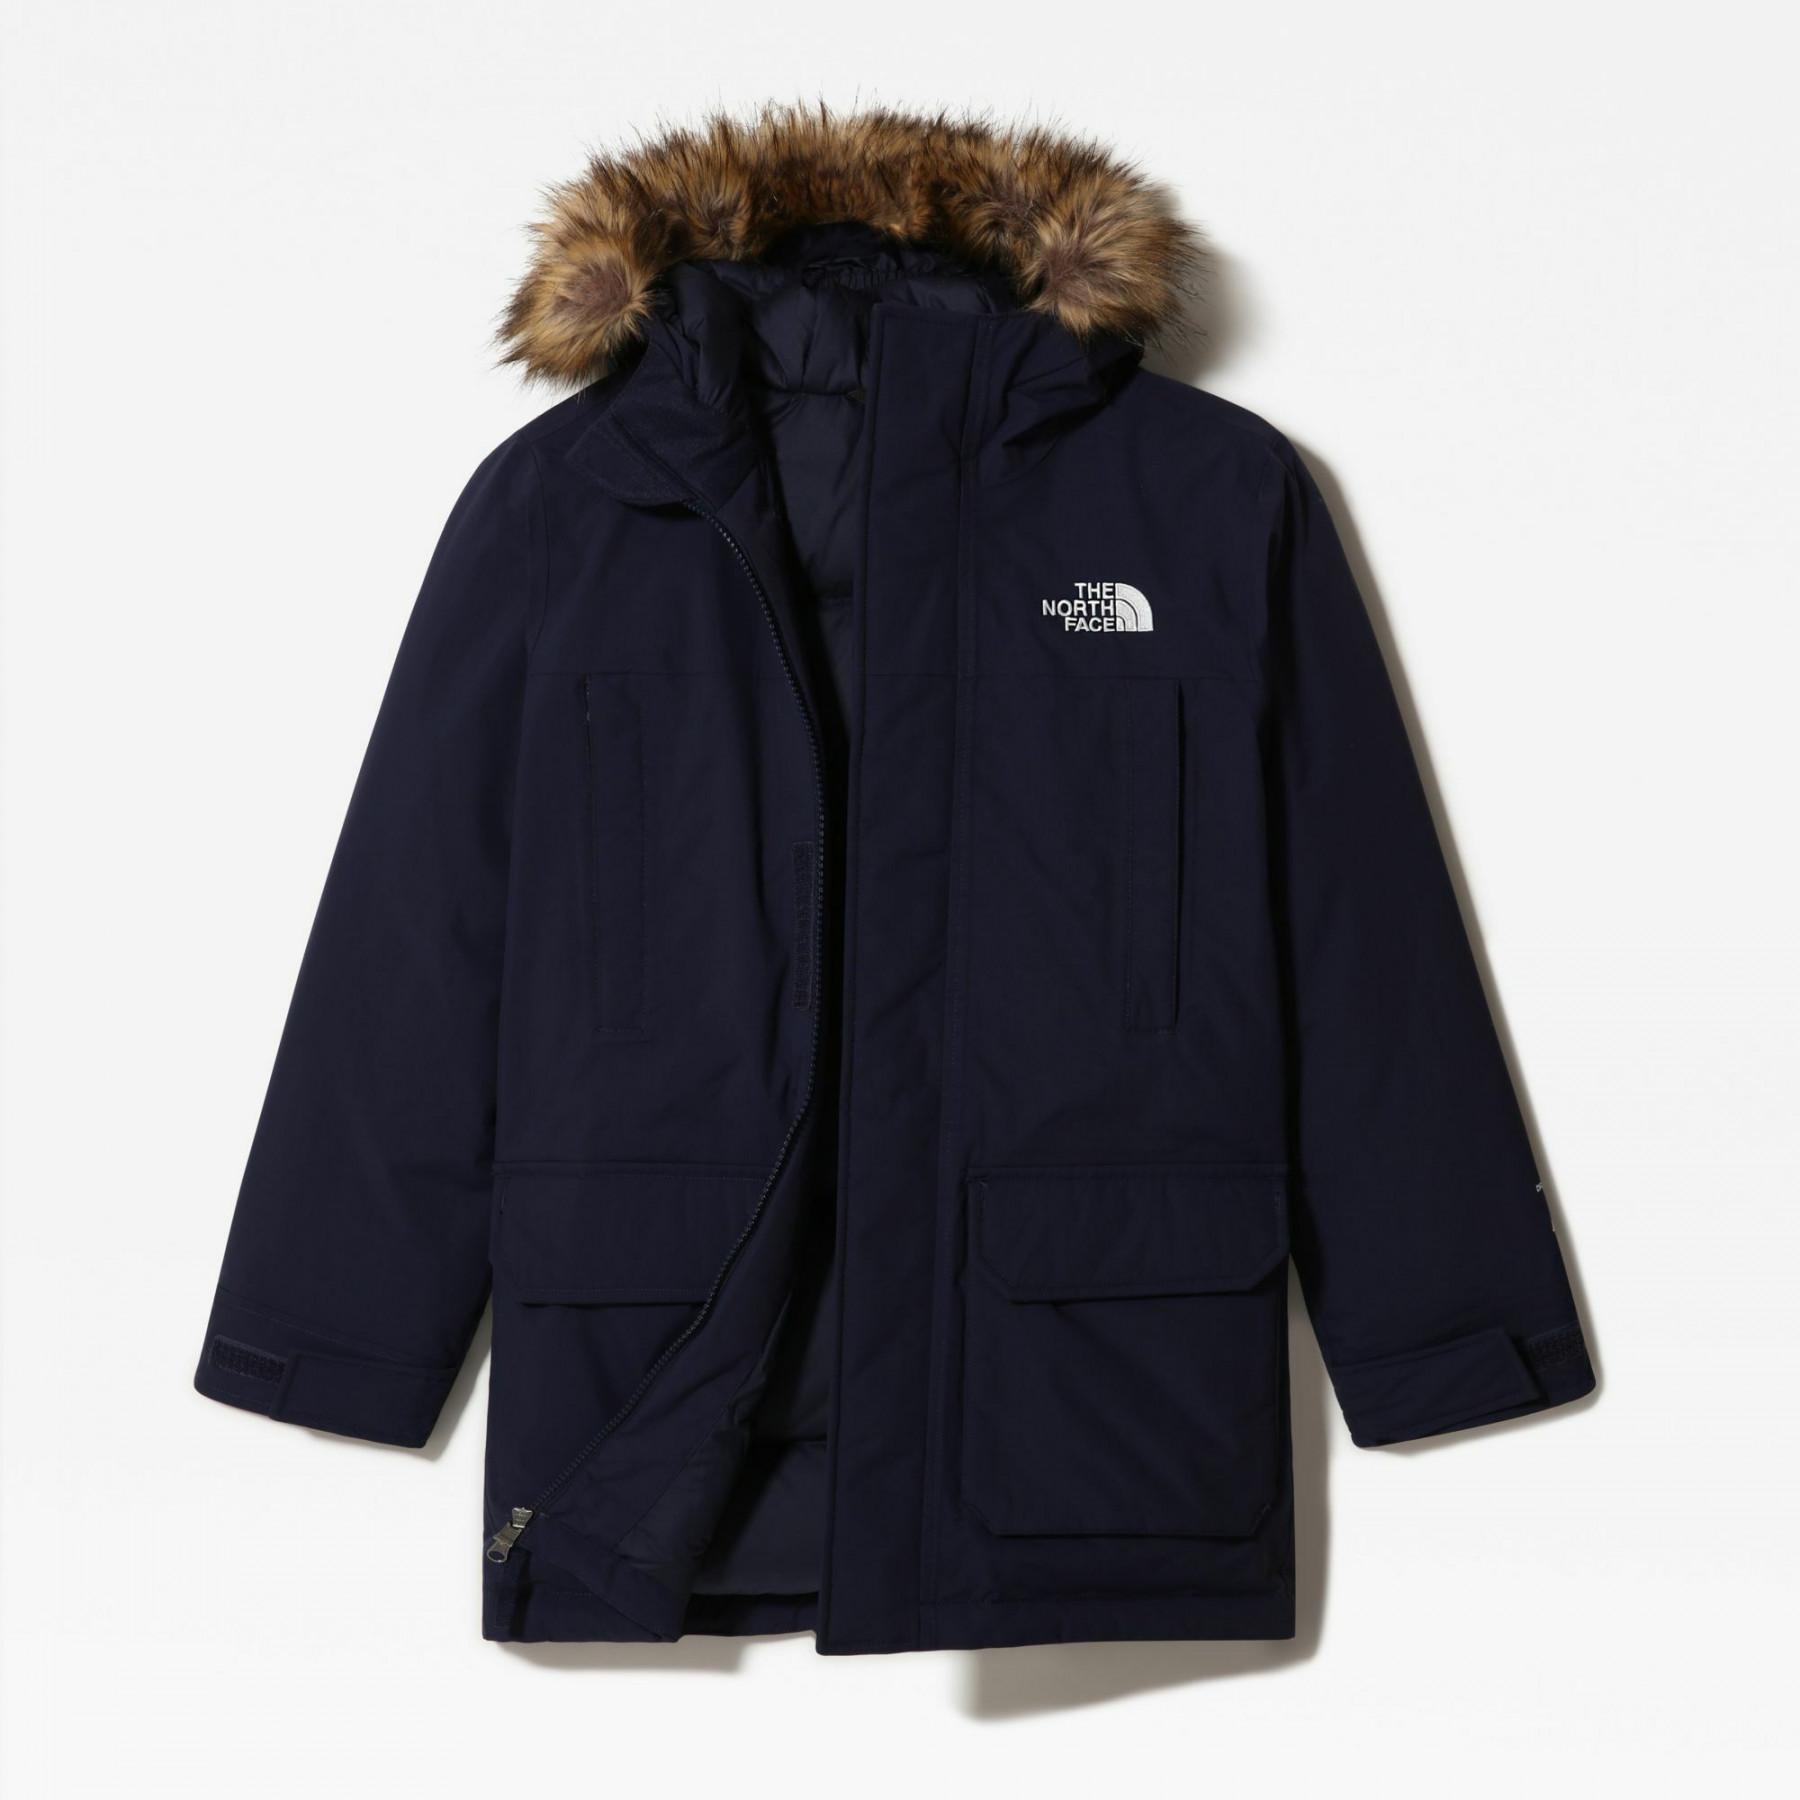 Children's parka The North Face DryVent™